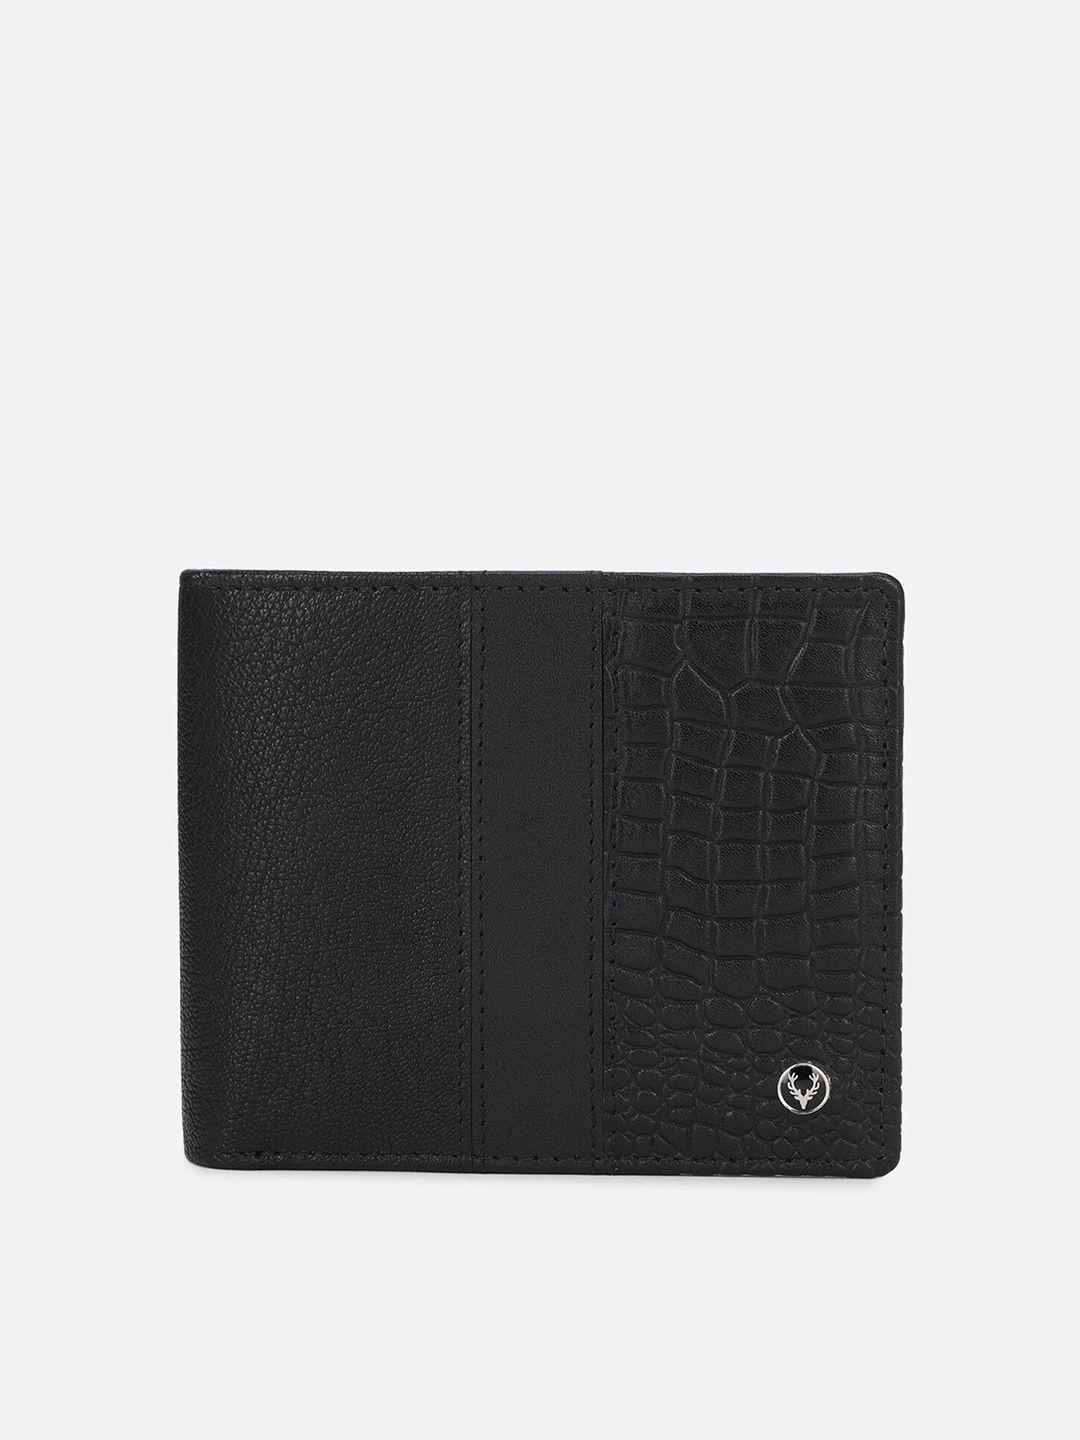 allen solly men black textured leather two fold wallet